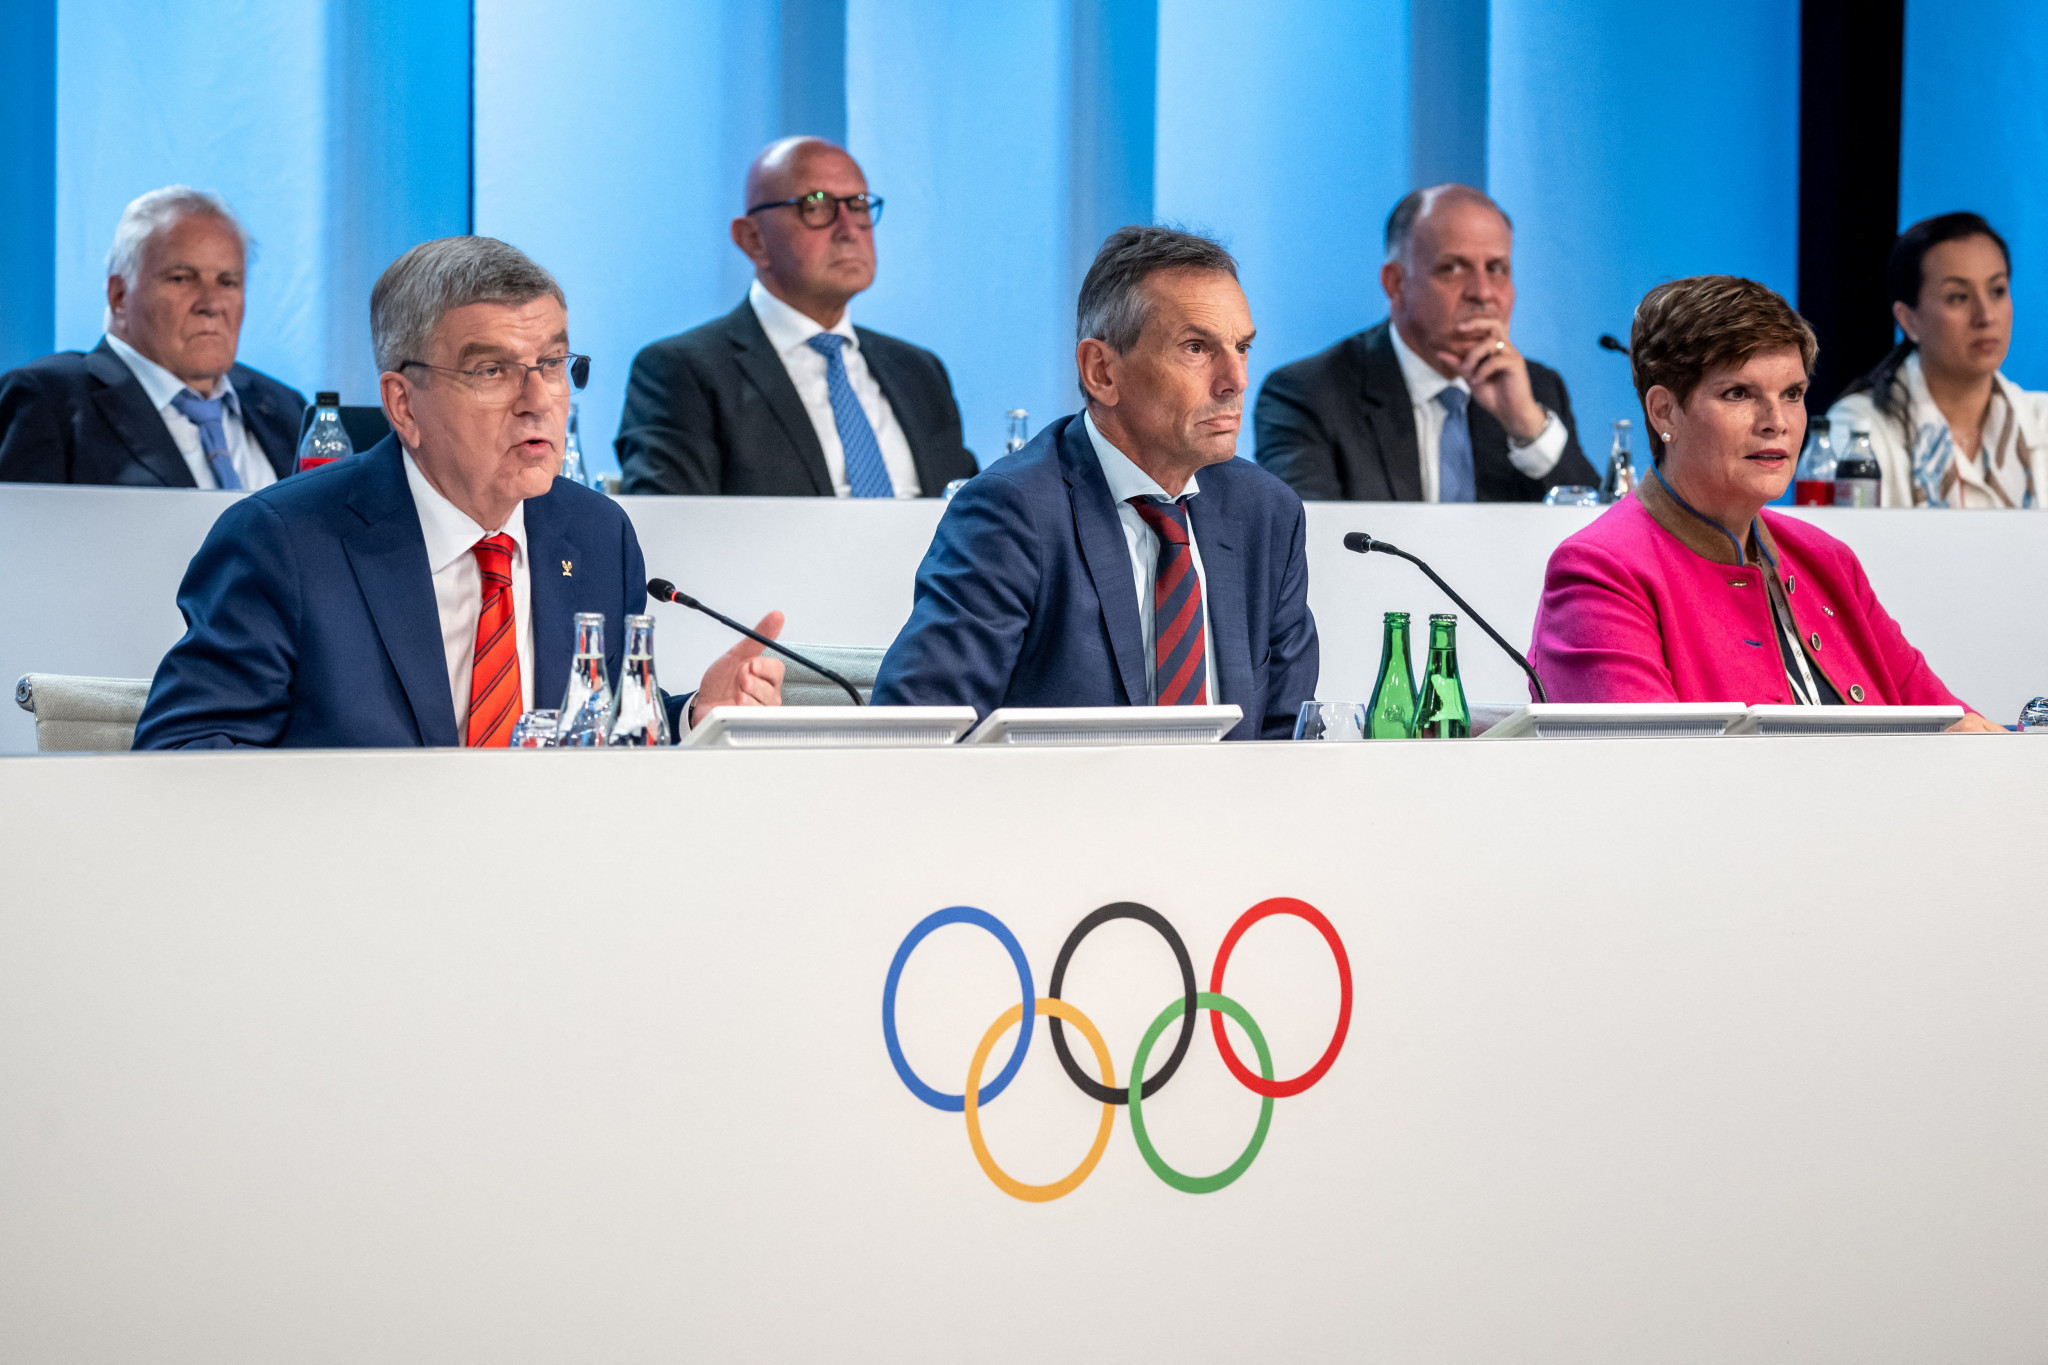 Thomas Bach fears events such as the World Friendship Games could rival the Olympics ©Getty Images